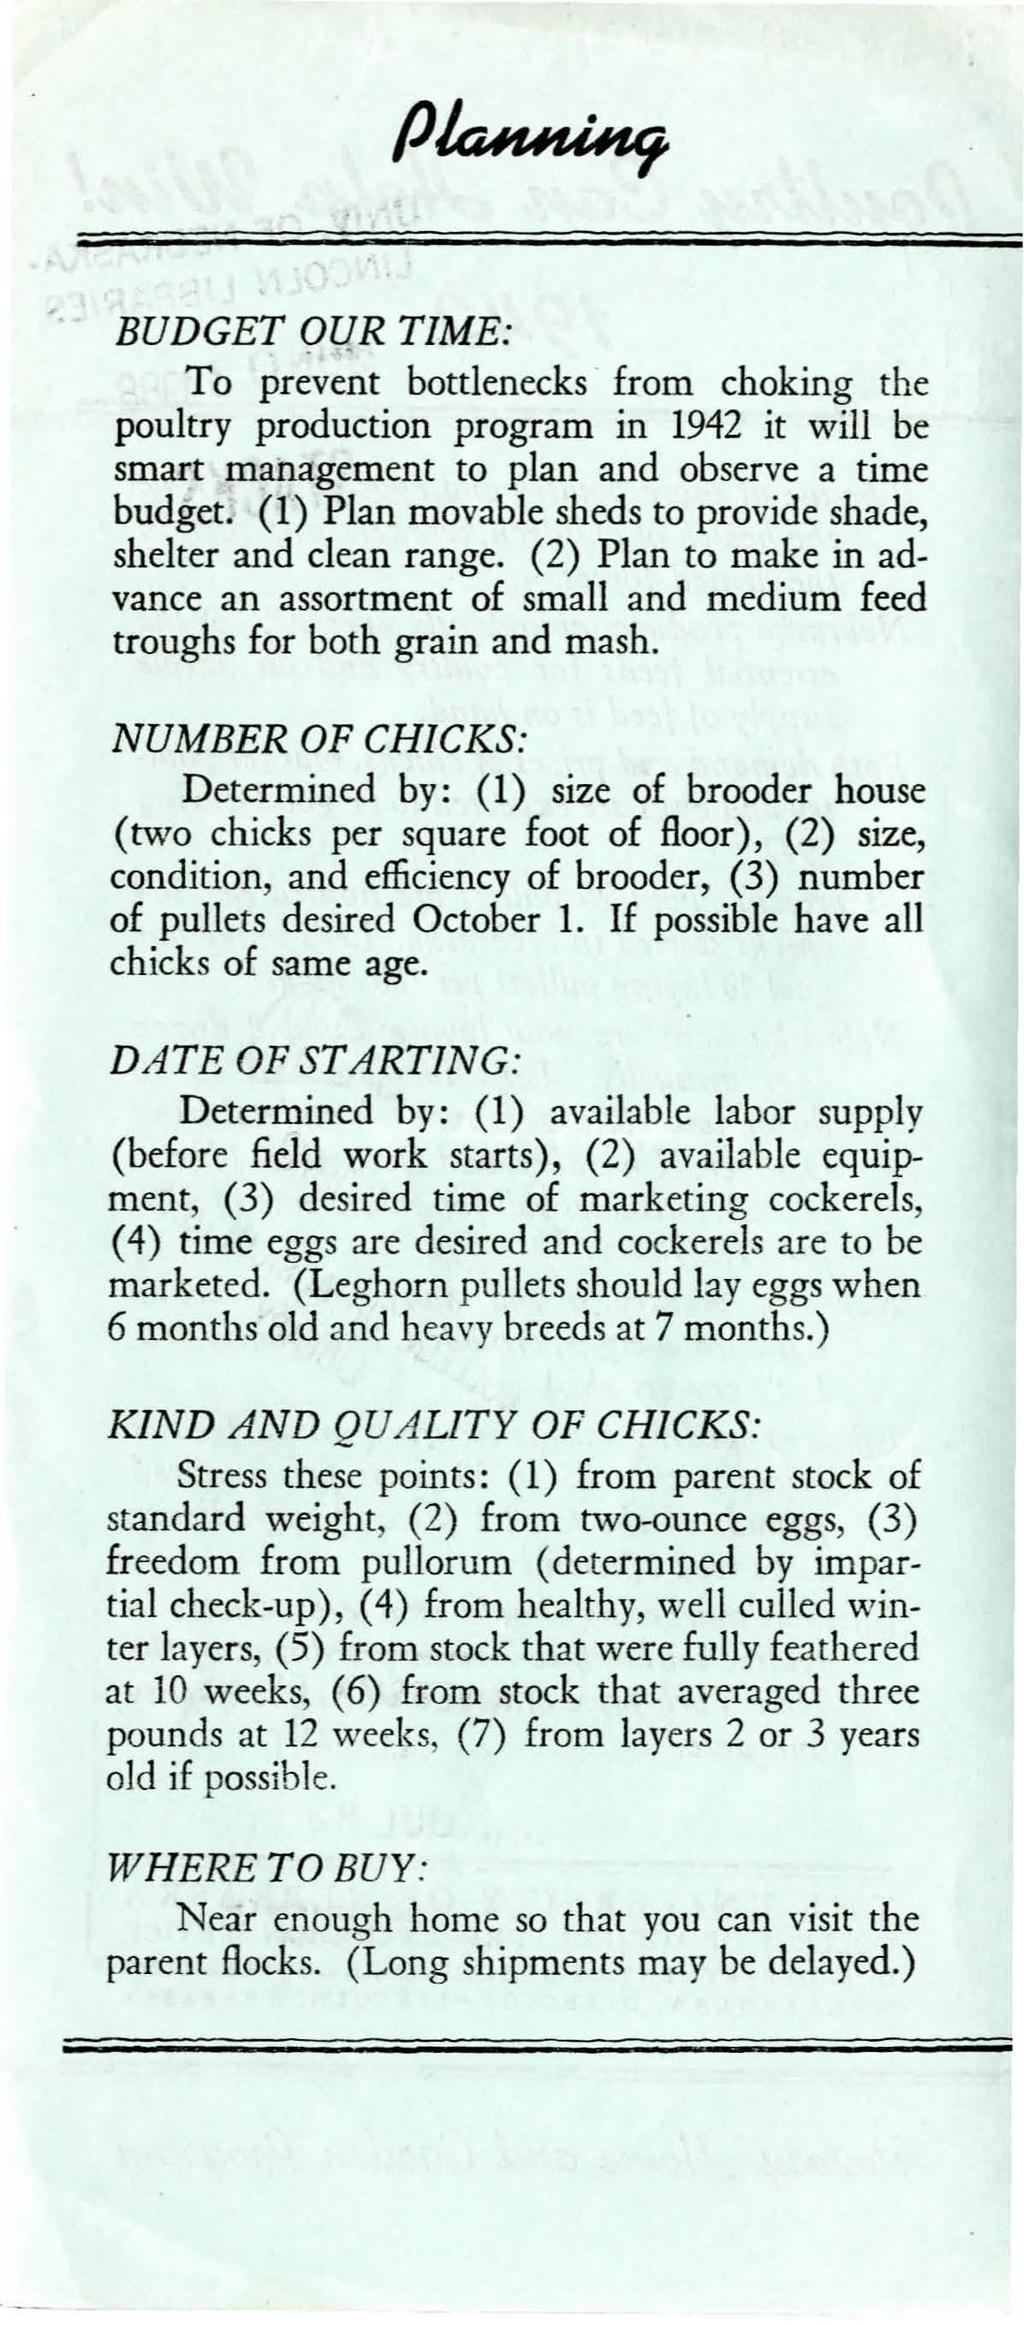 ' BUDGET O[[R TME: To prevent bottlenecks from choking the poultry production program in 1942 it will be smart management to plan and observe a time budget.